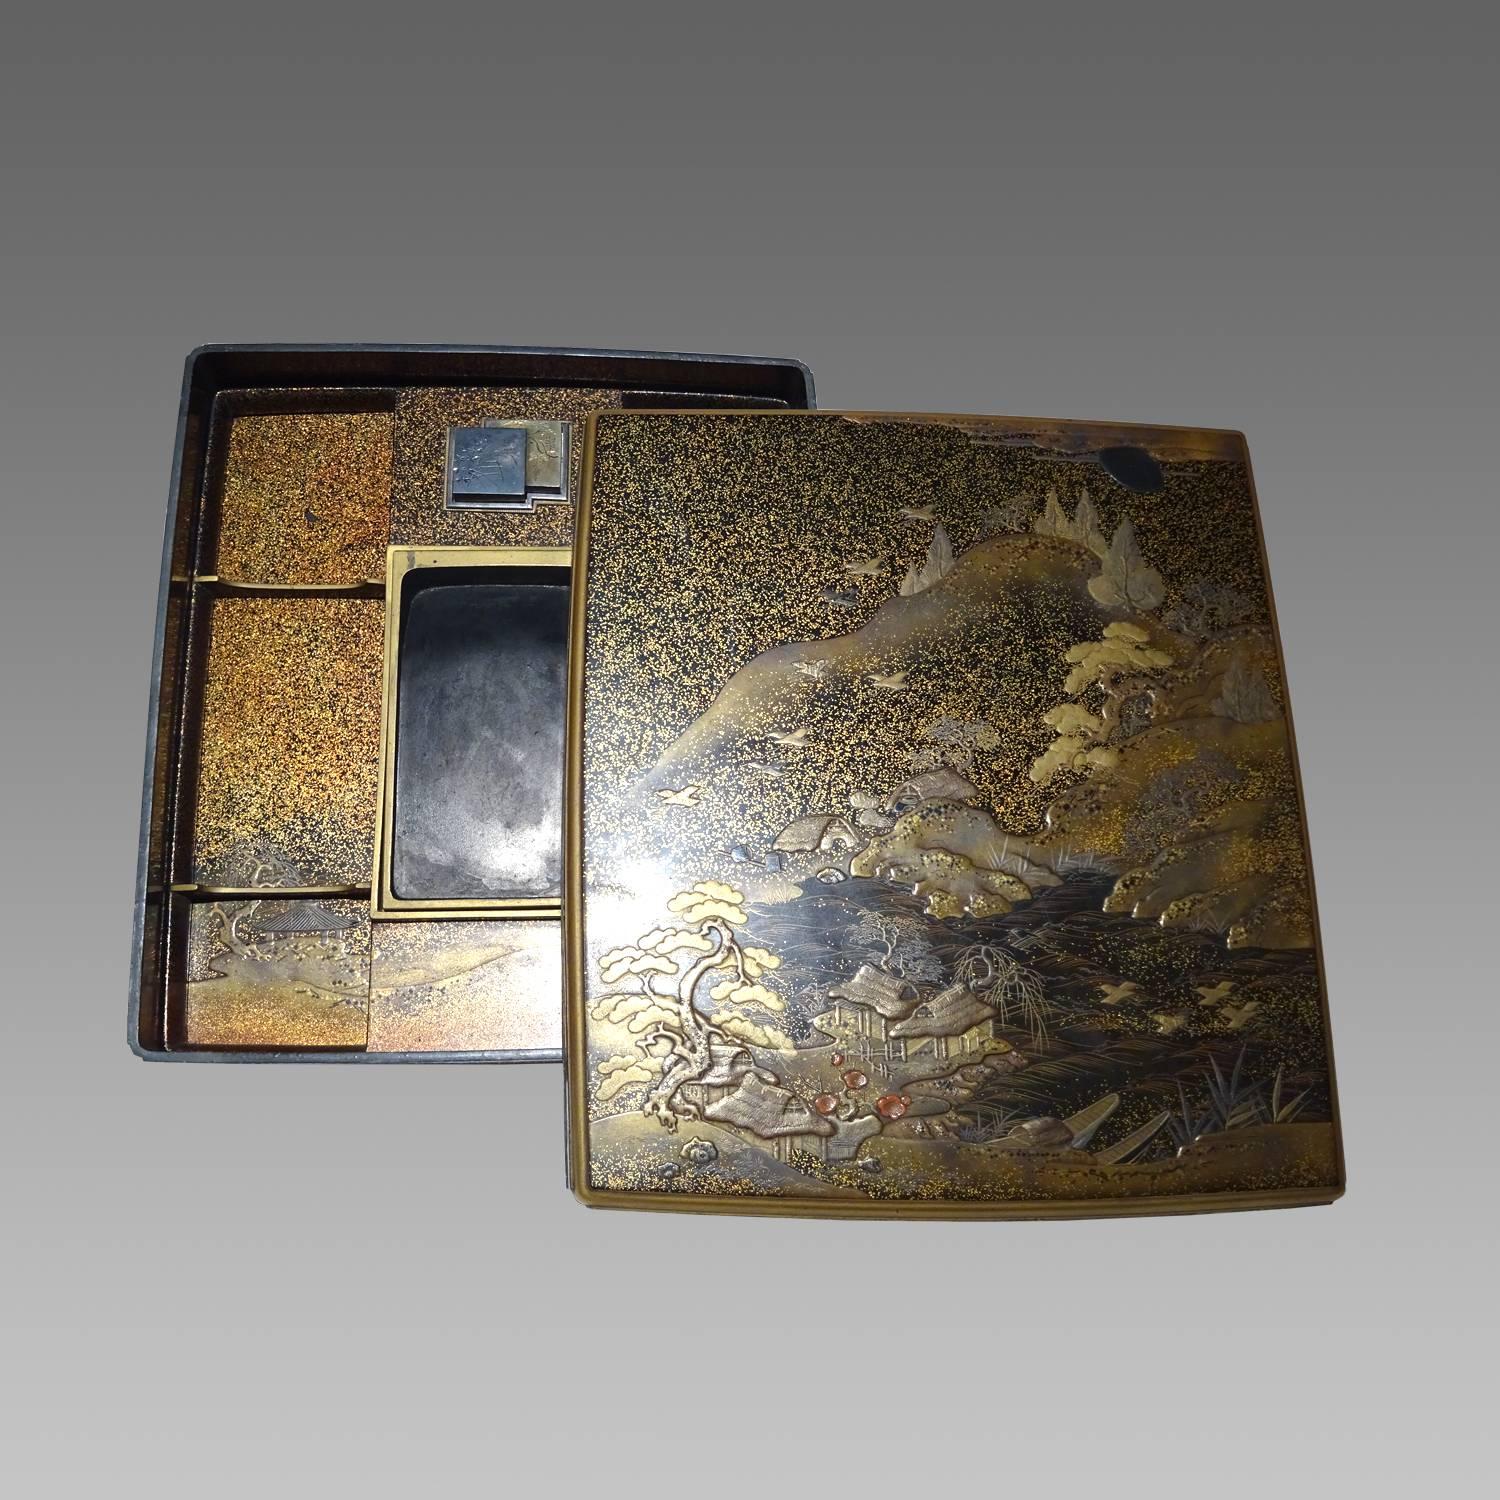 The writing set in gold and silver lacquer with hardstones and lead inlays, using maki-e, hiramaki-e, takamaki-e and nashiji techniques. The suzuribako is decorated with houses in a landscape of mountains and river. The inside of the box showing a